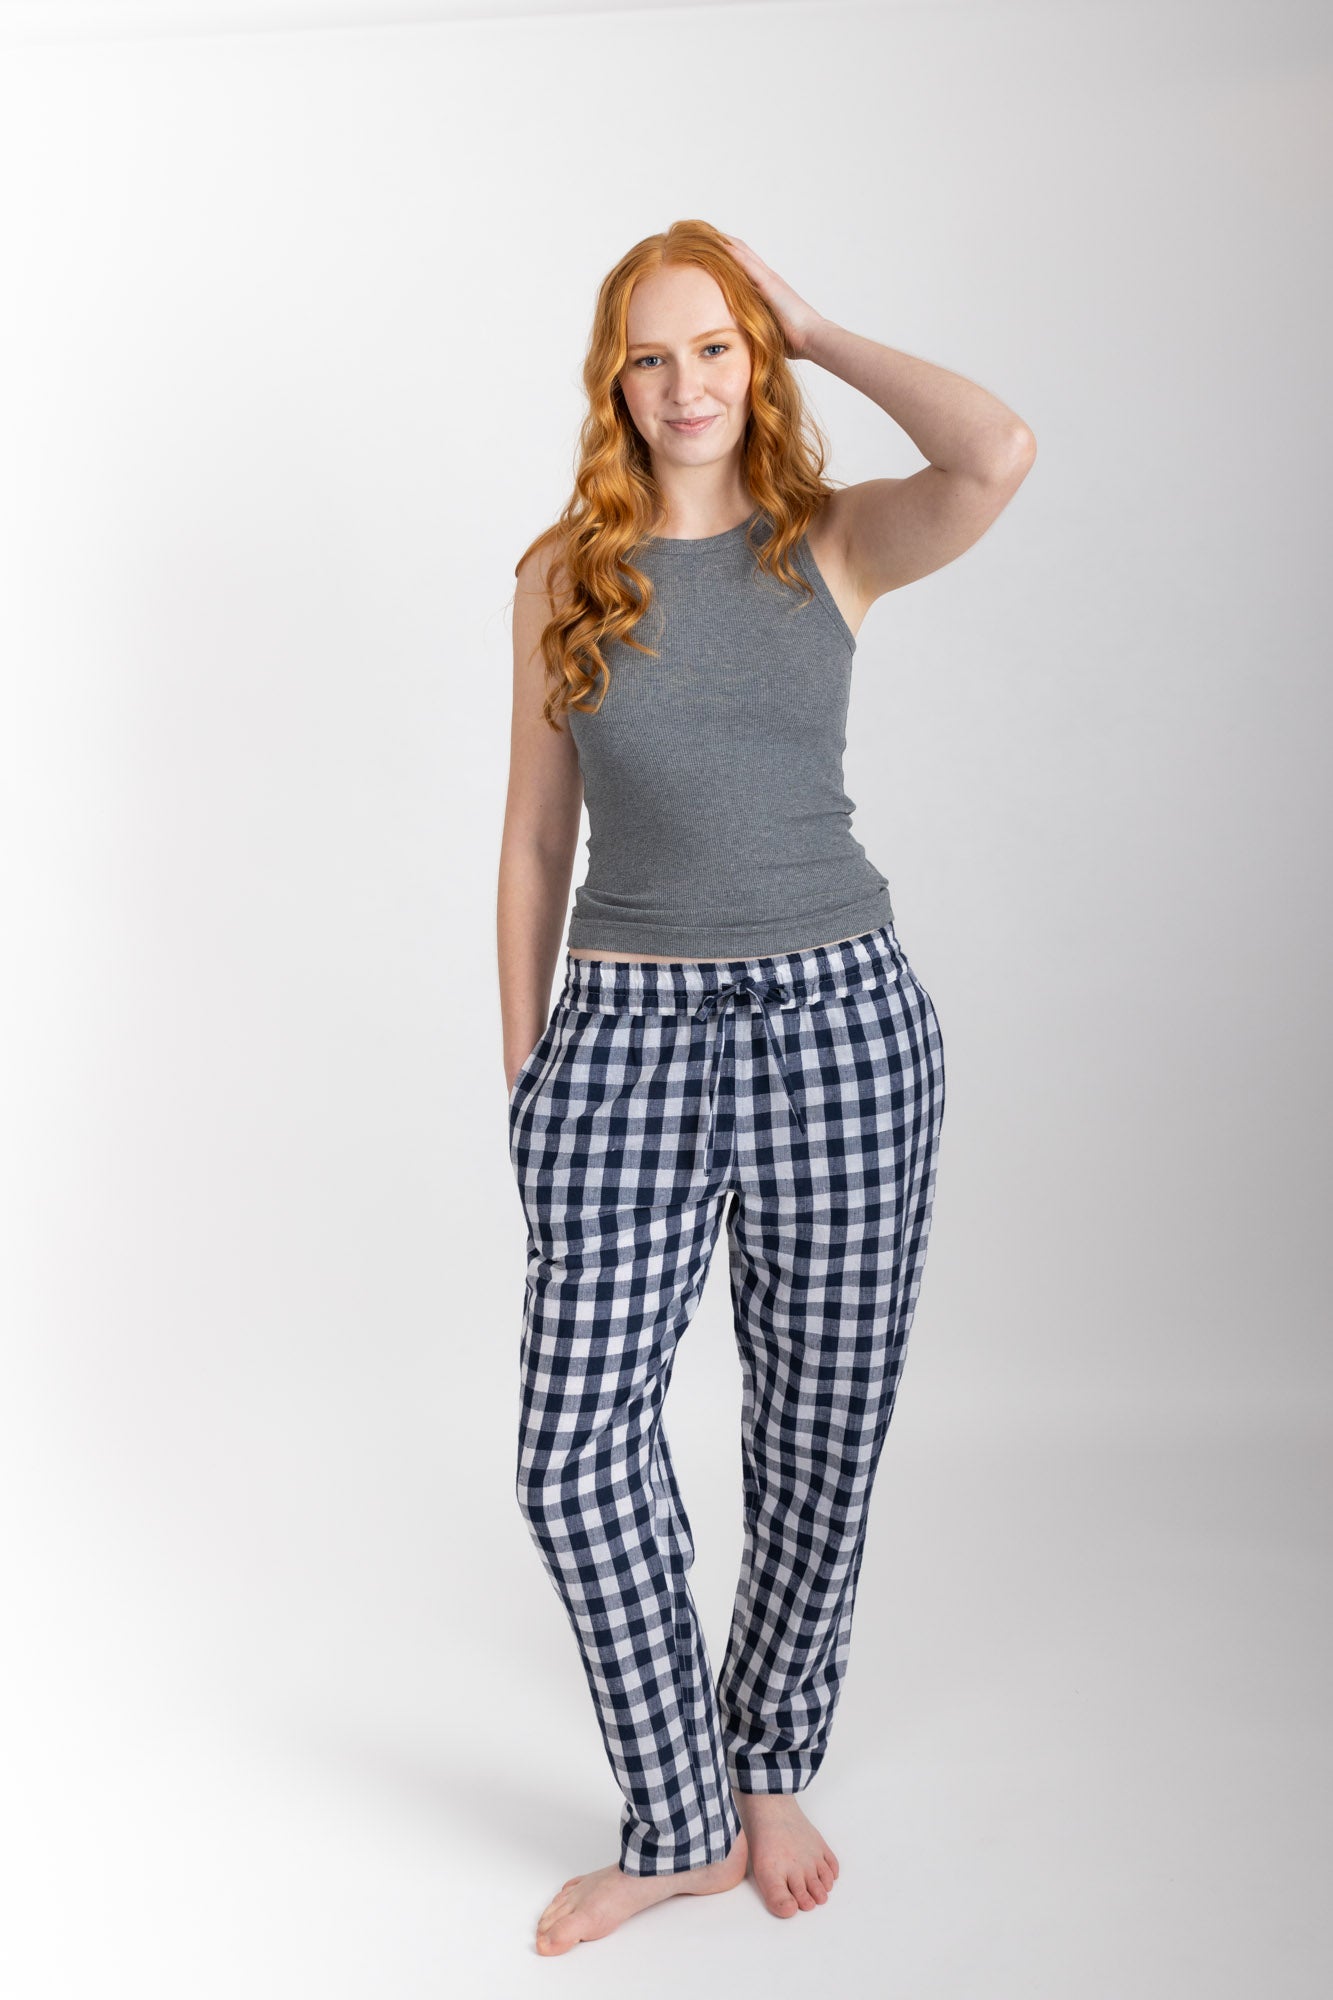 Women’s pyjama pant.  Made from an organic cotton and linen blend, in a Navy check.  These pants feature an elasticated waistband with a drawstring for comfort.